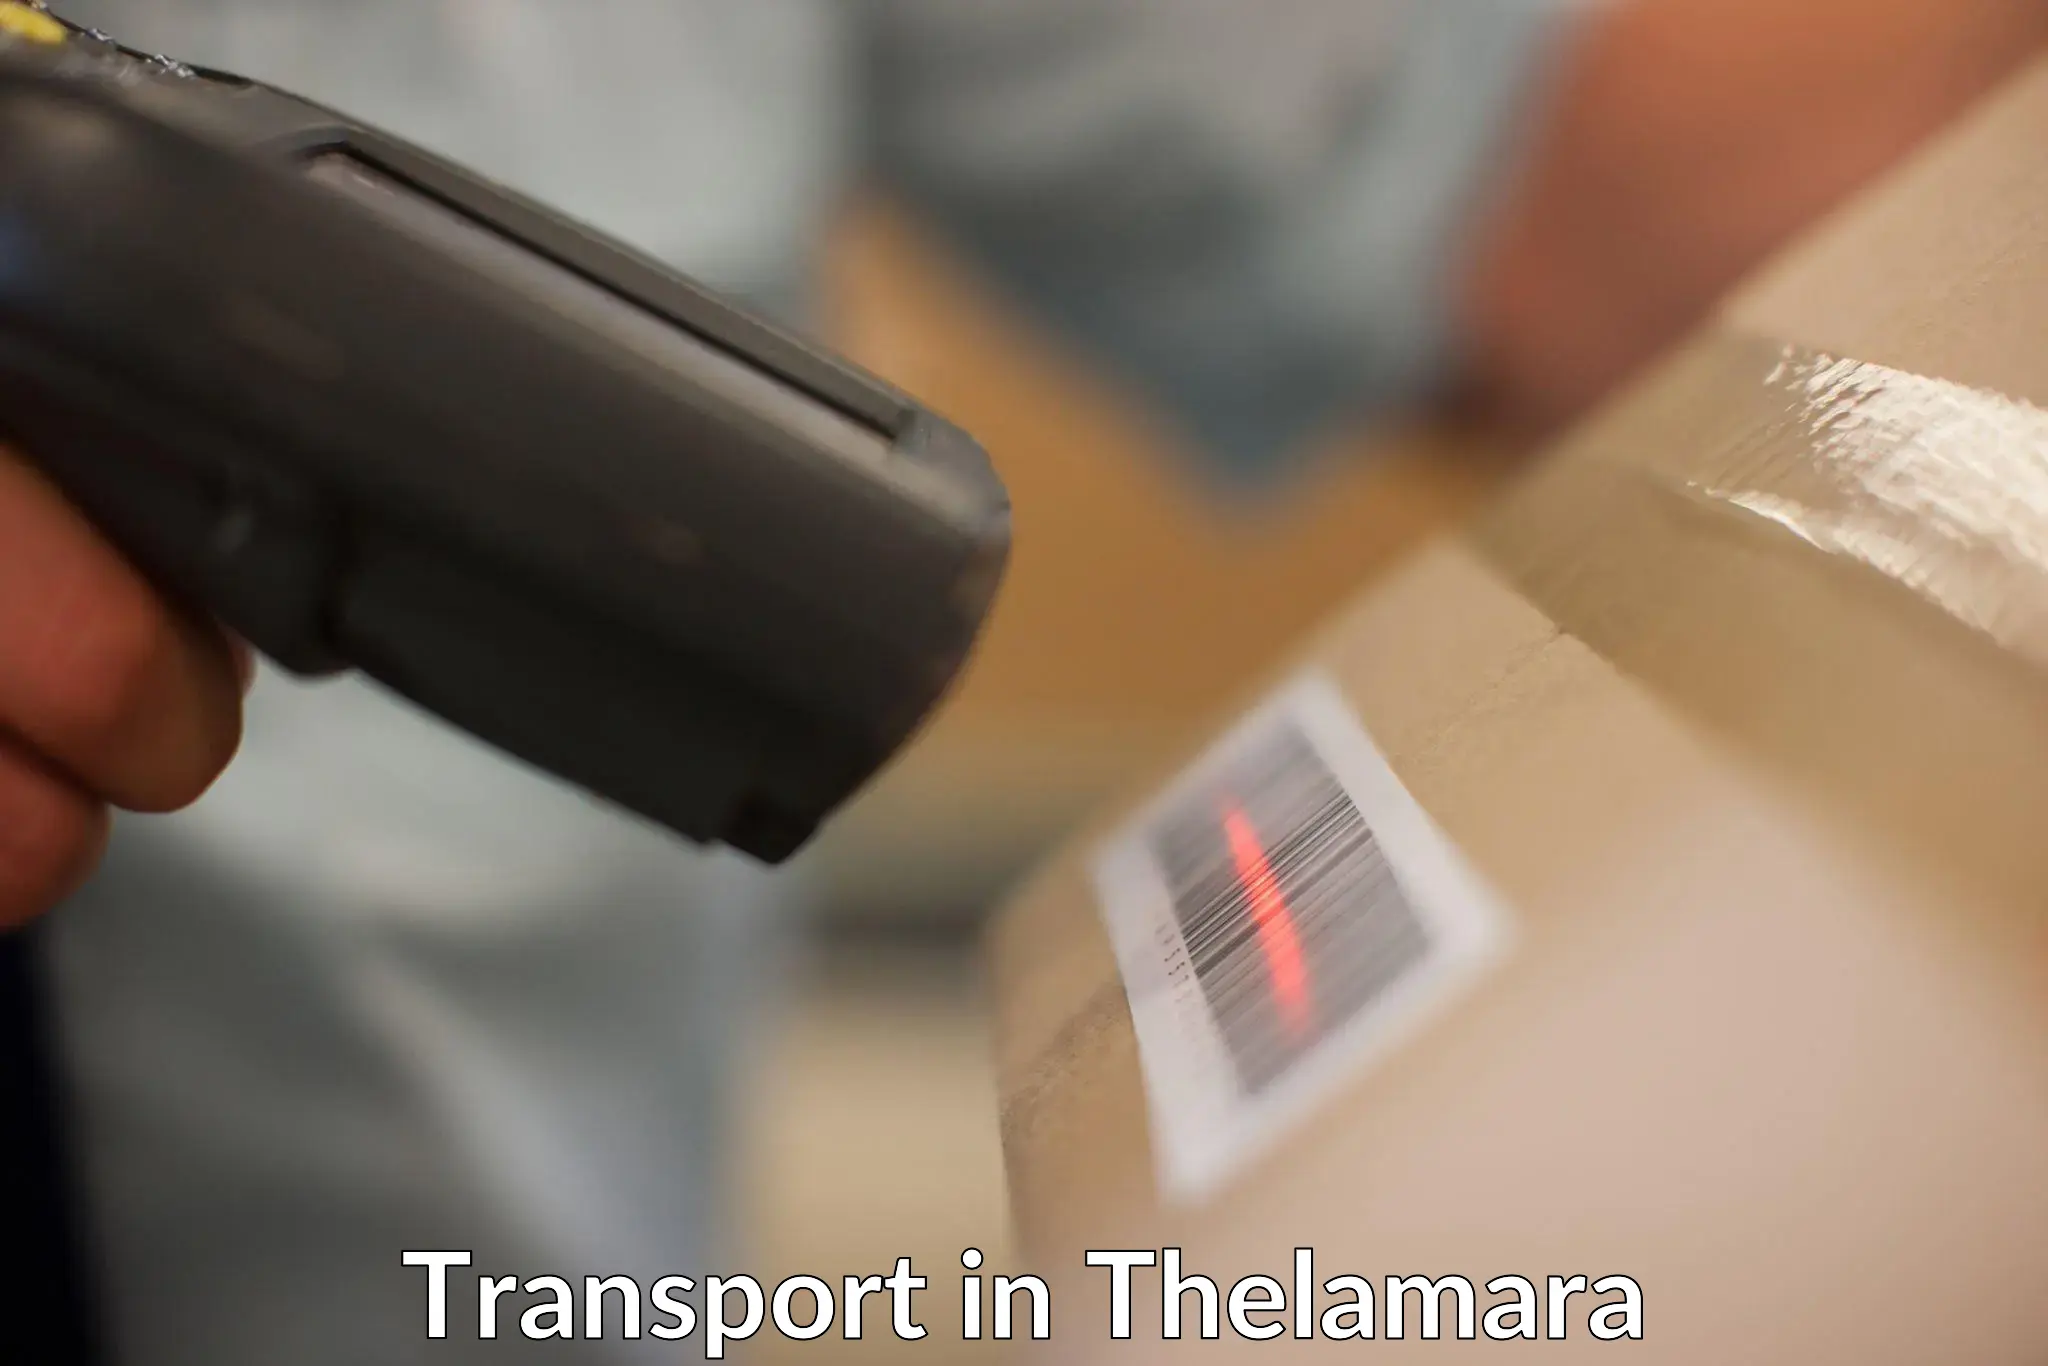 Air freight transport services in Thelamara